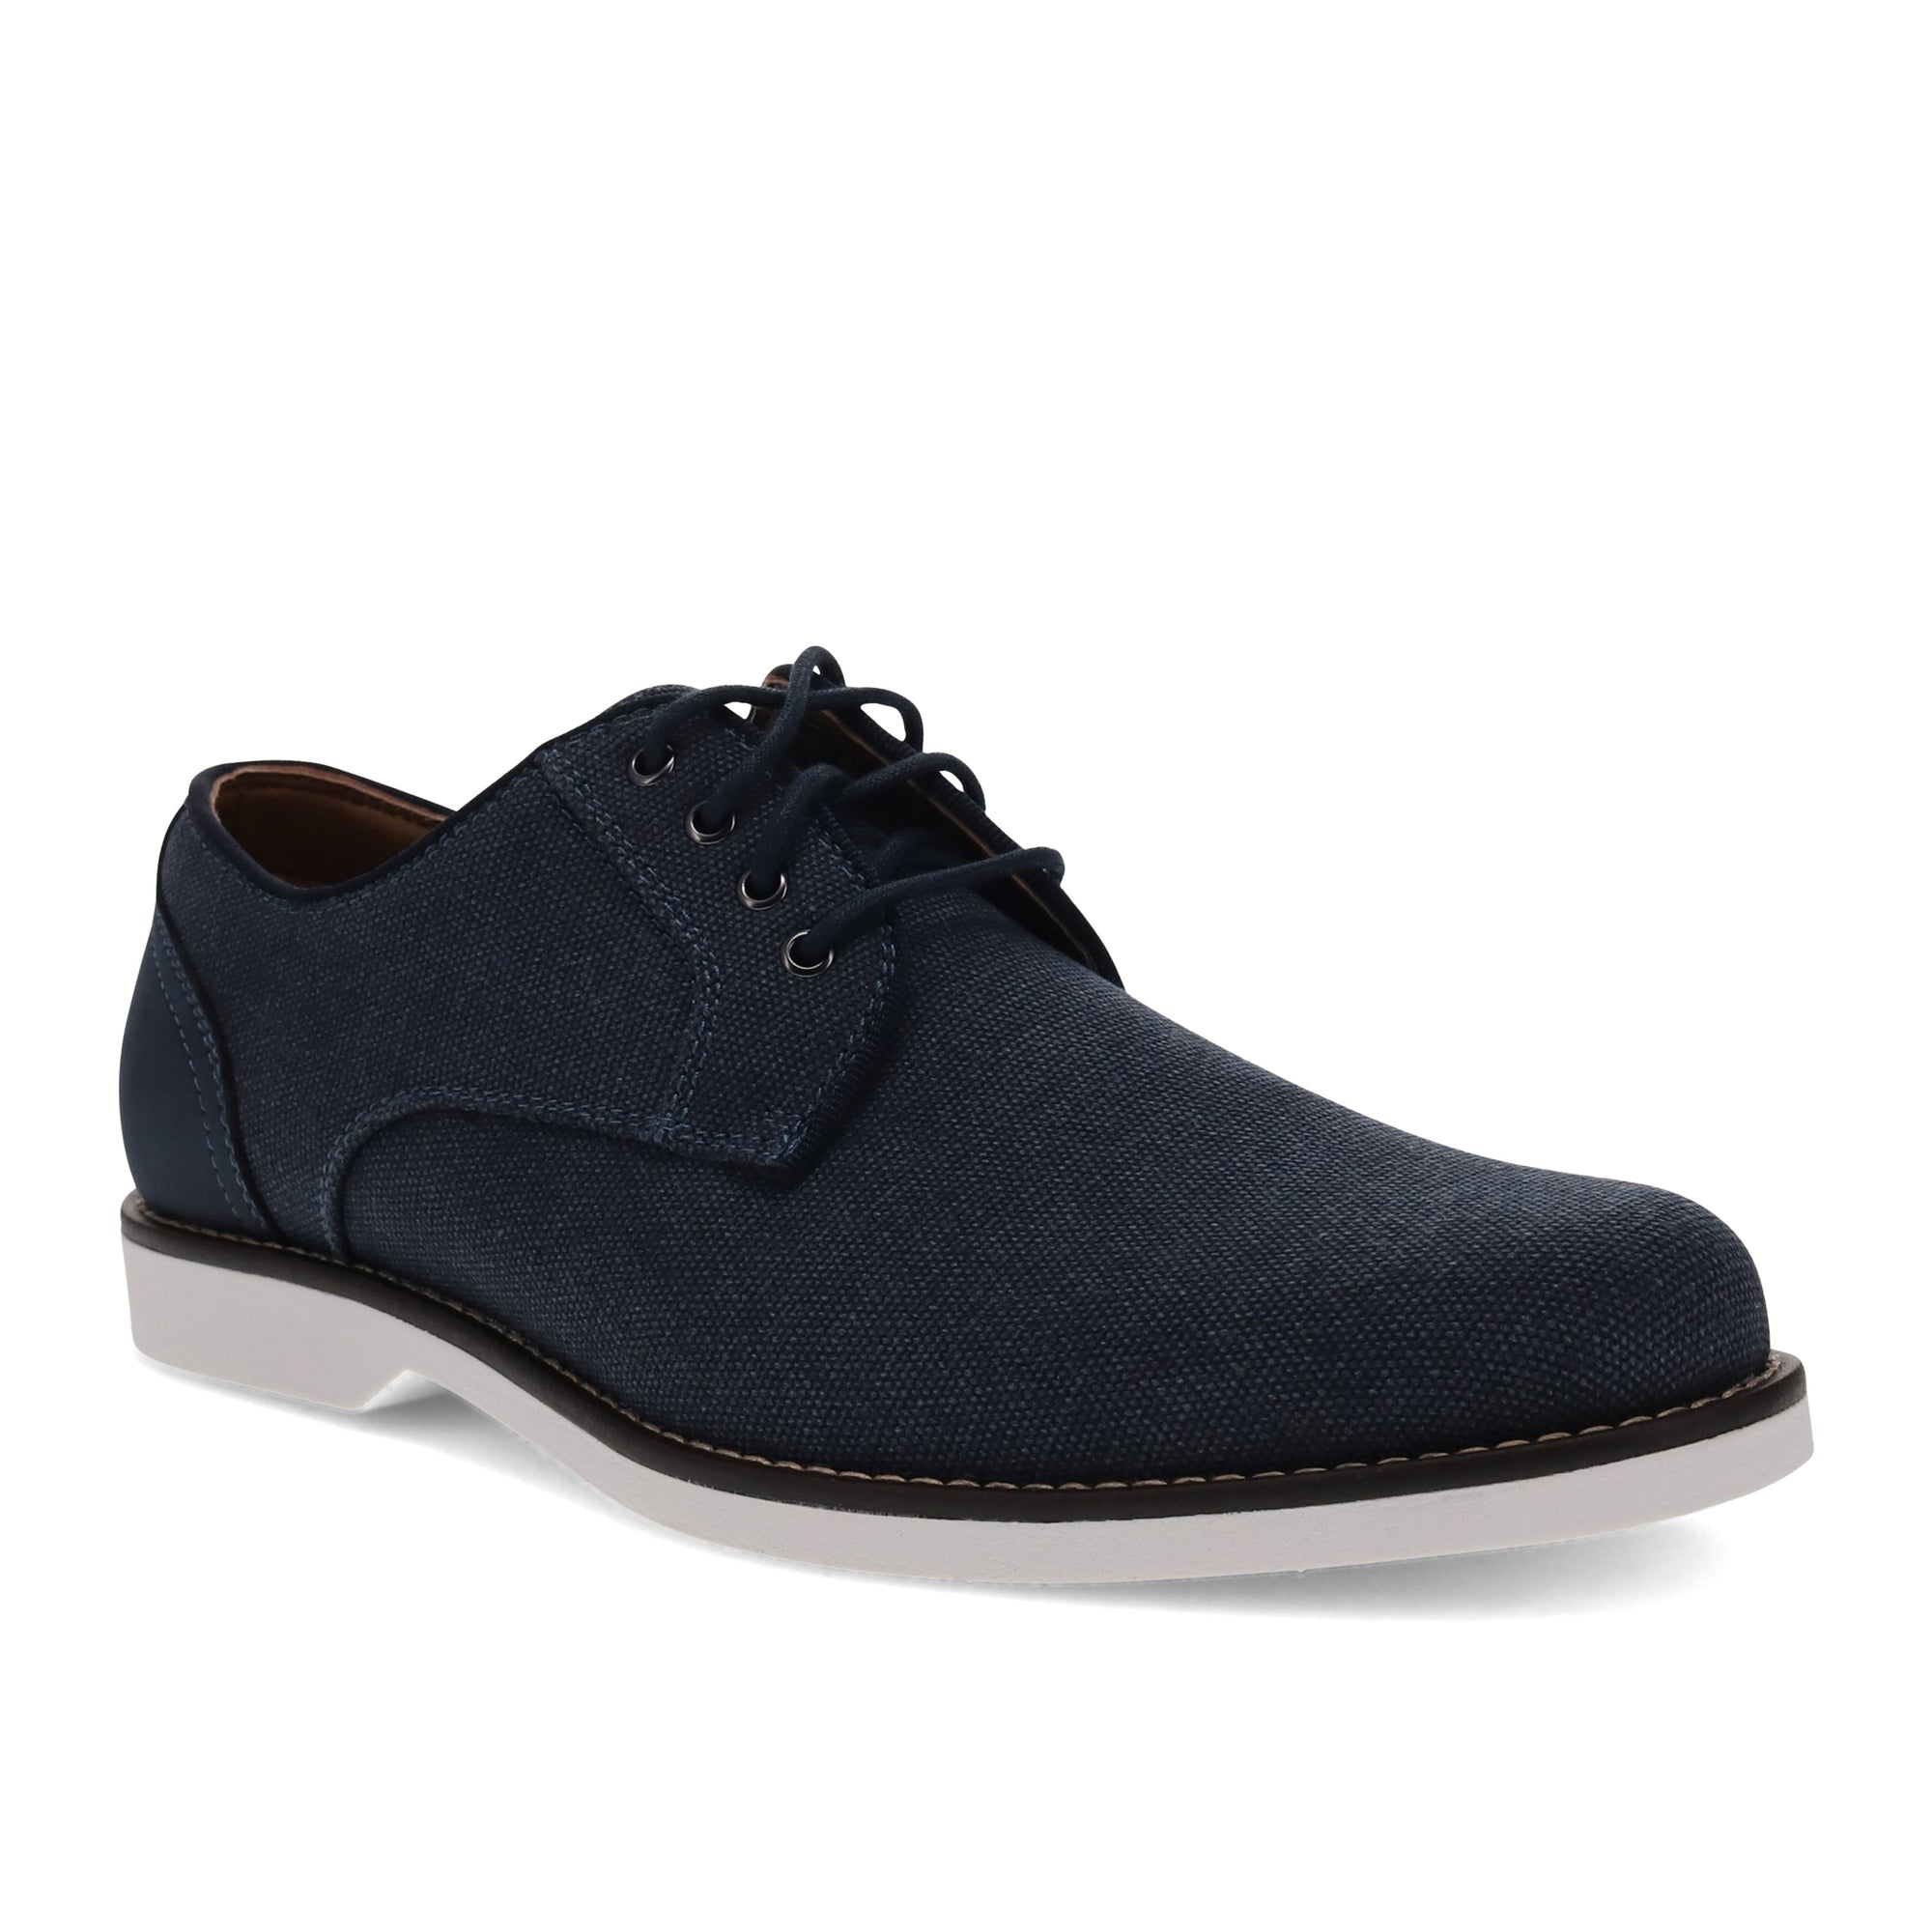 Navy-Dockers Mens Pryce Washed Canvas Dress Casual Lace Up Oxford Shoe